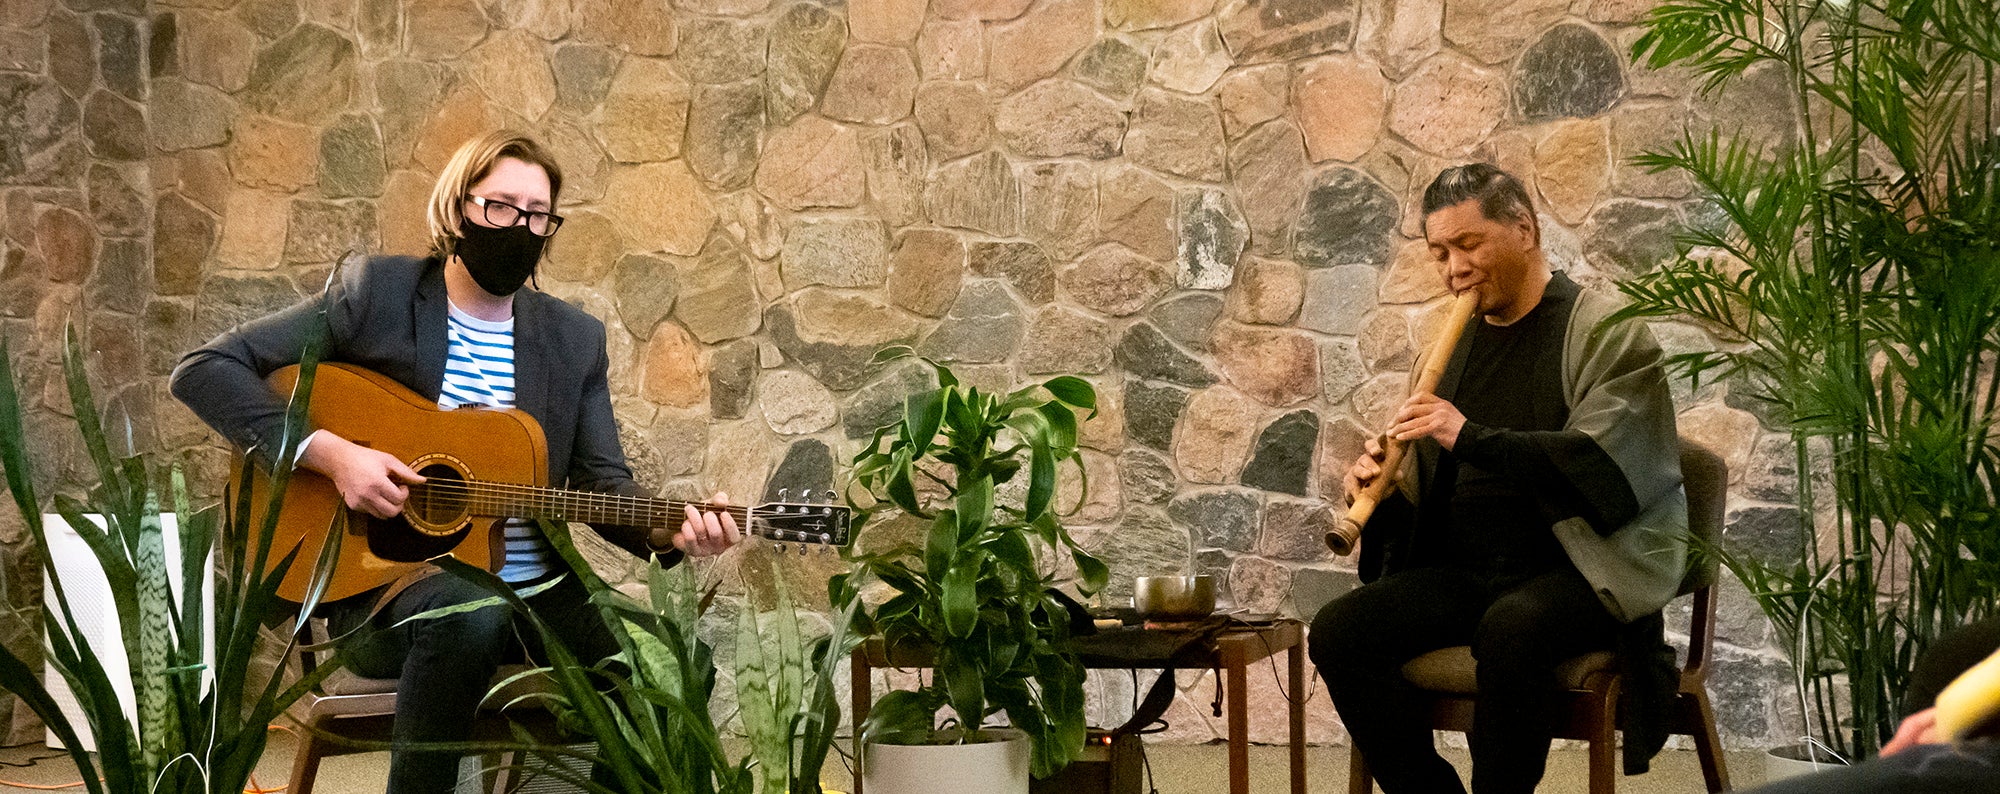 Two people playing guitar and flute